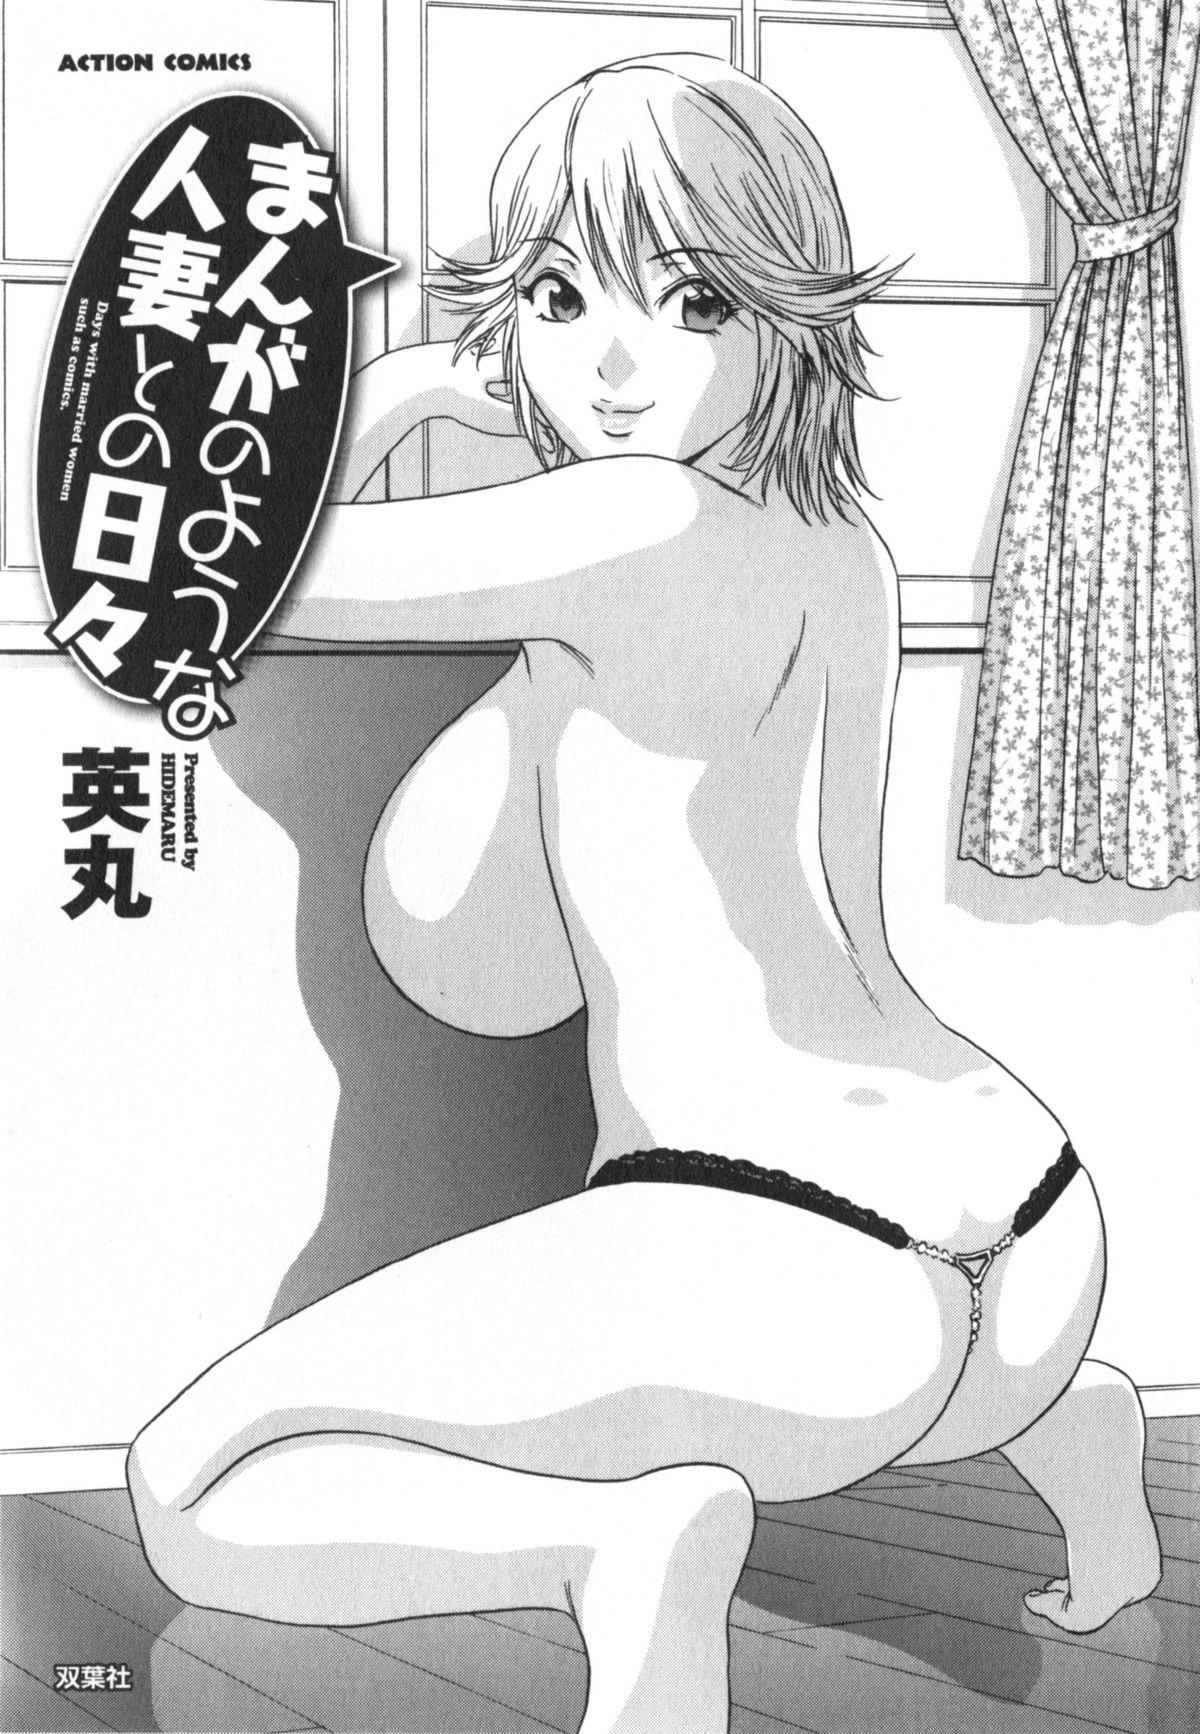 Perfect Pussy [Hidemaru] Life with Married Women Just Like a Manga 1 - Ch. 1-8 [English] {Tadanohito} Hot Naked Girl - Page 4